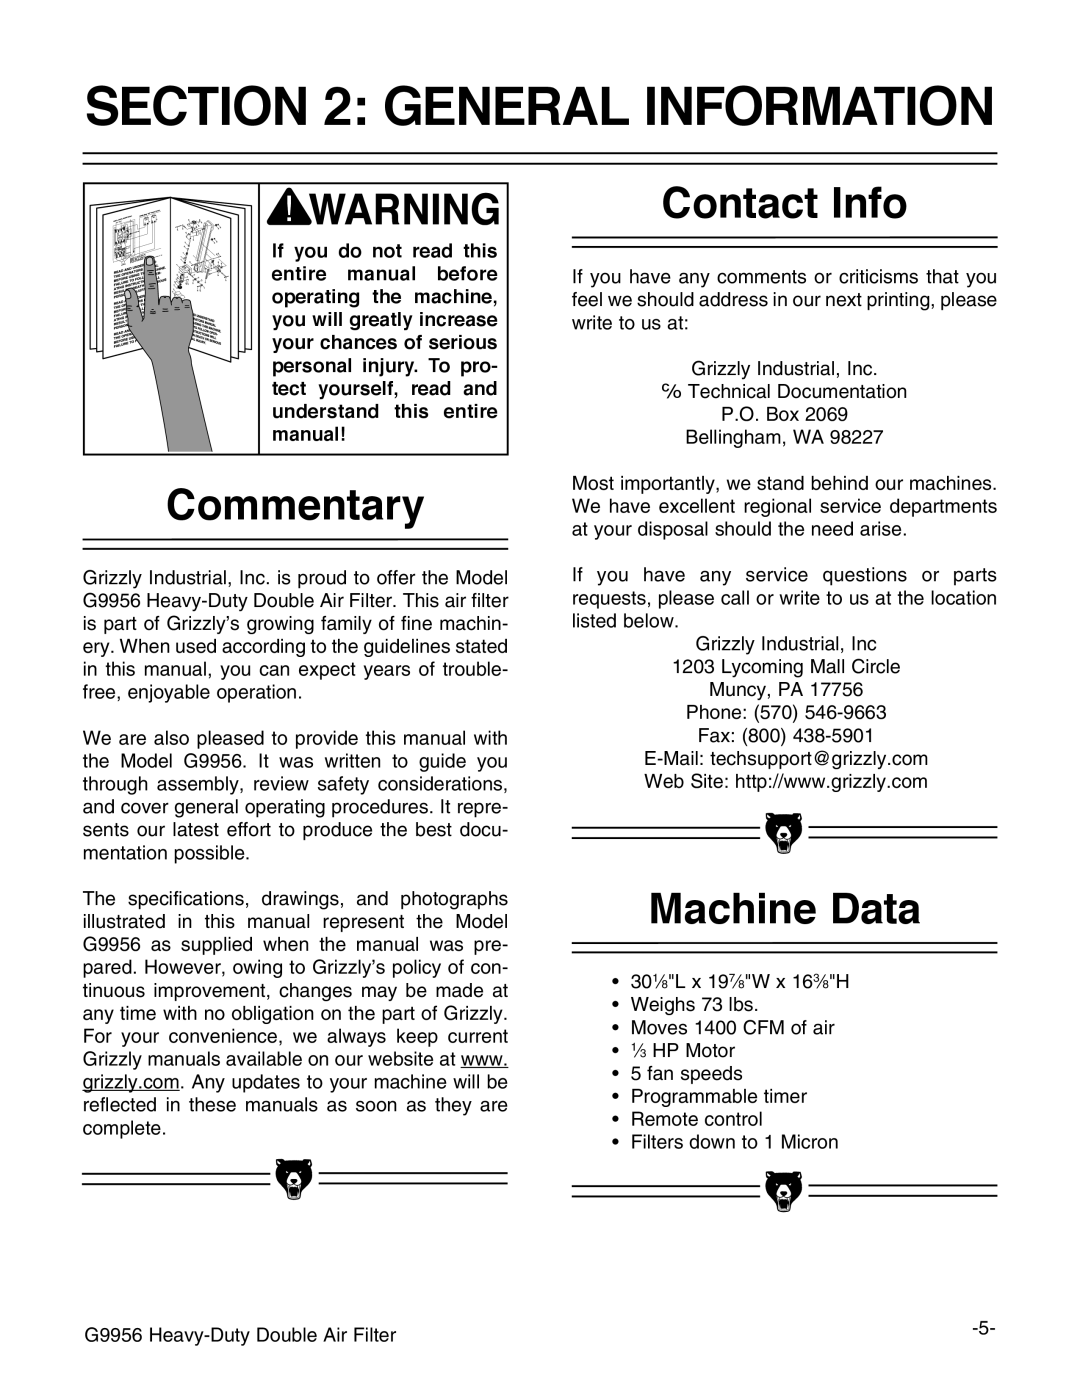 Grizzly G9956 instruction manual General Information, Commentary, Contact Info, Machine Data 